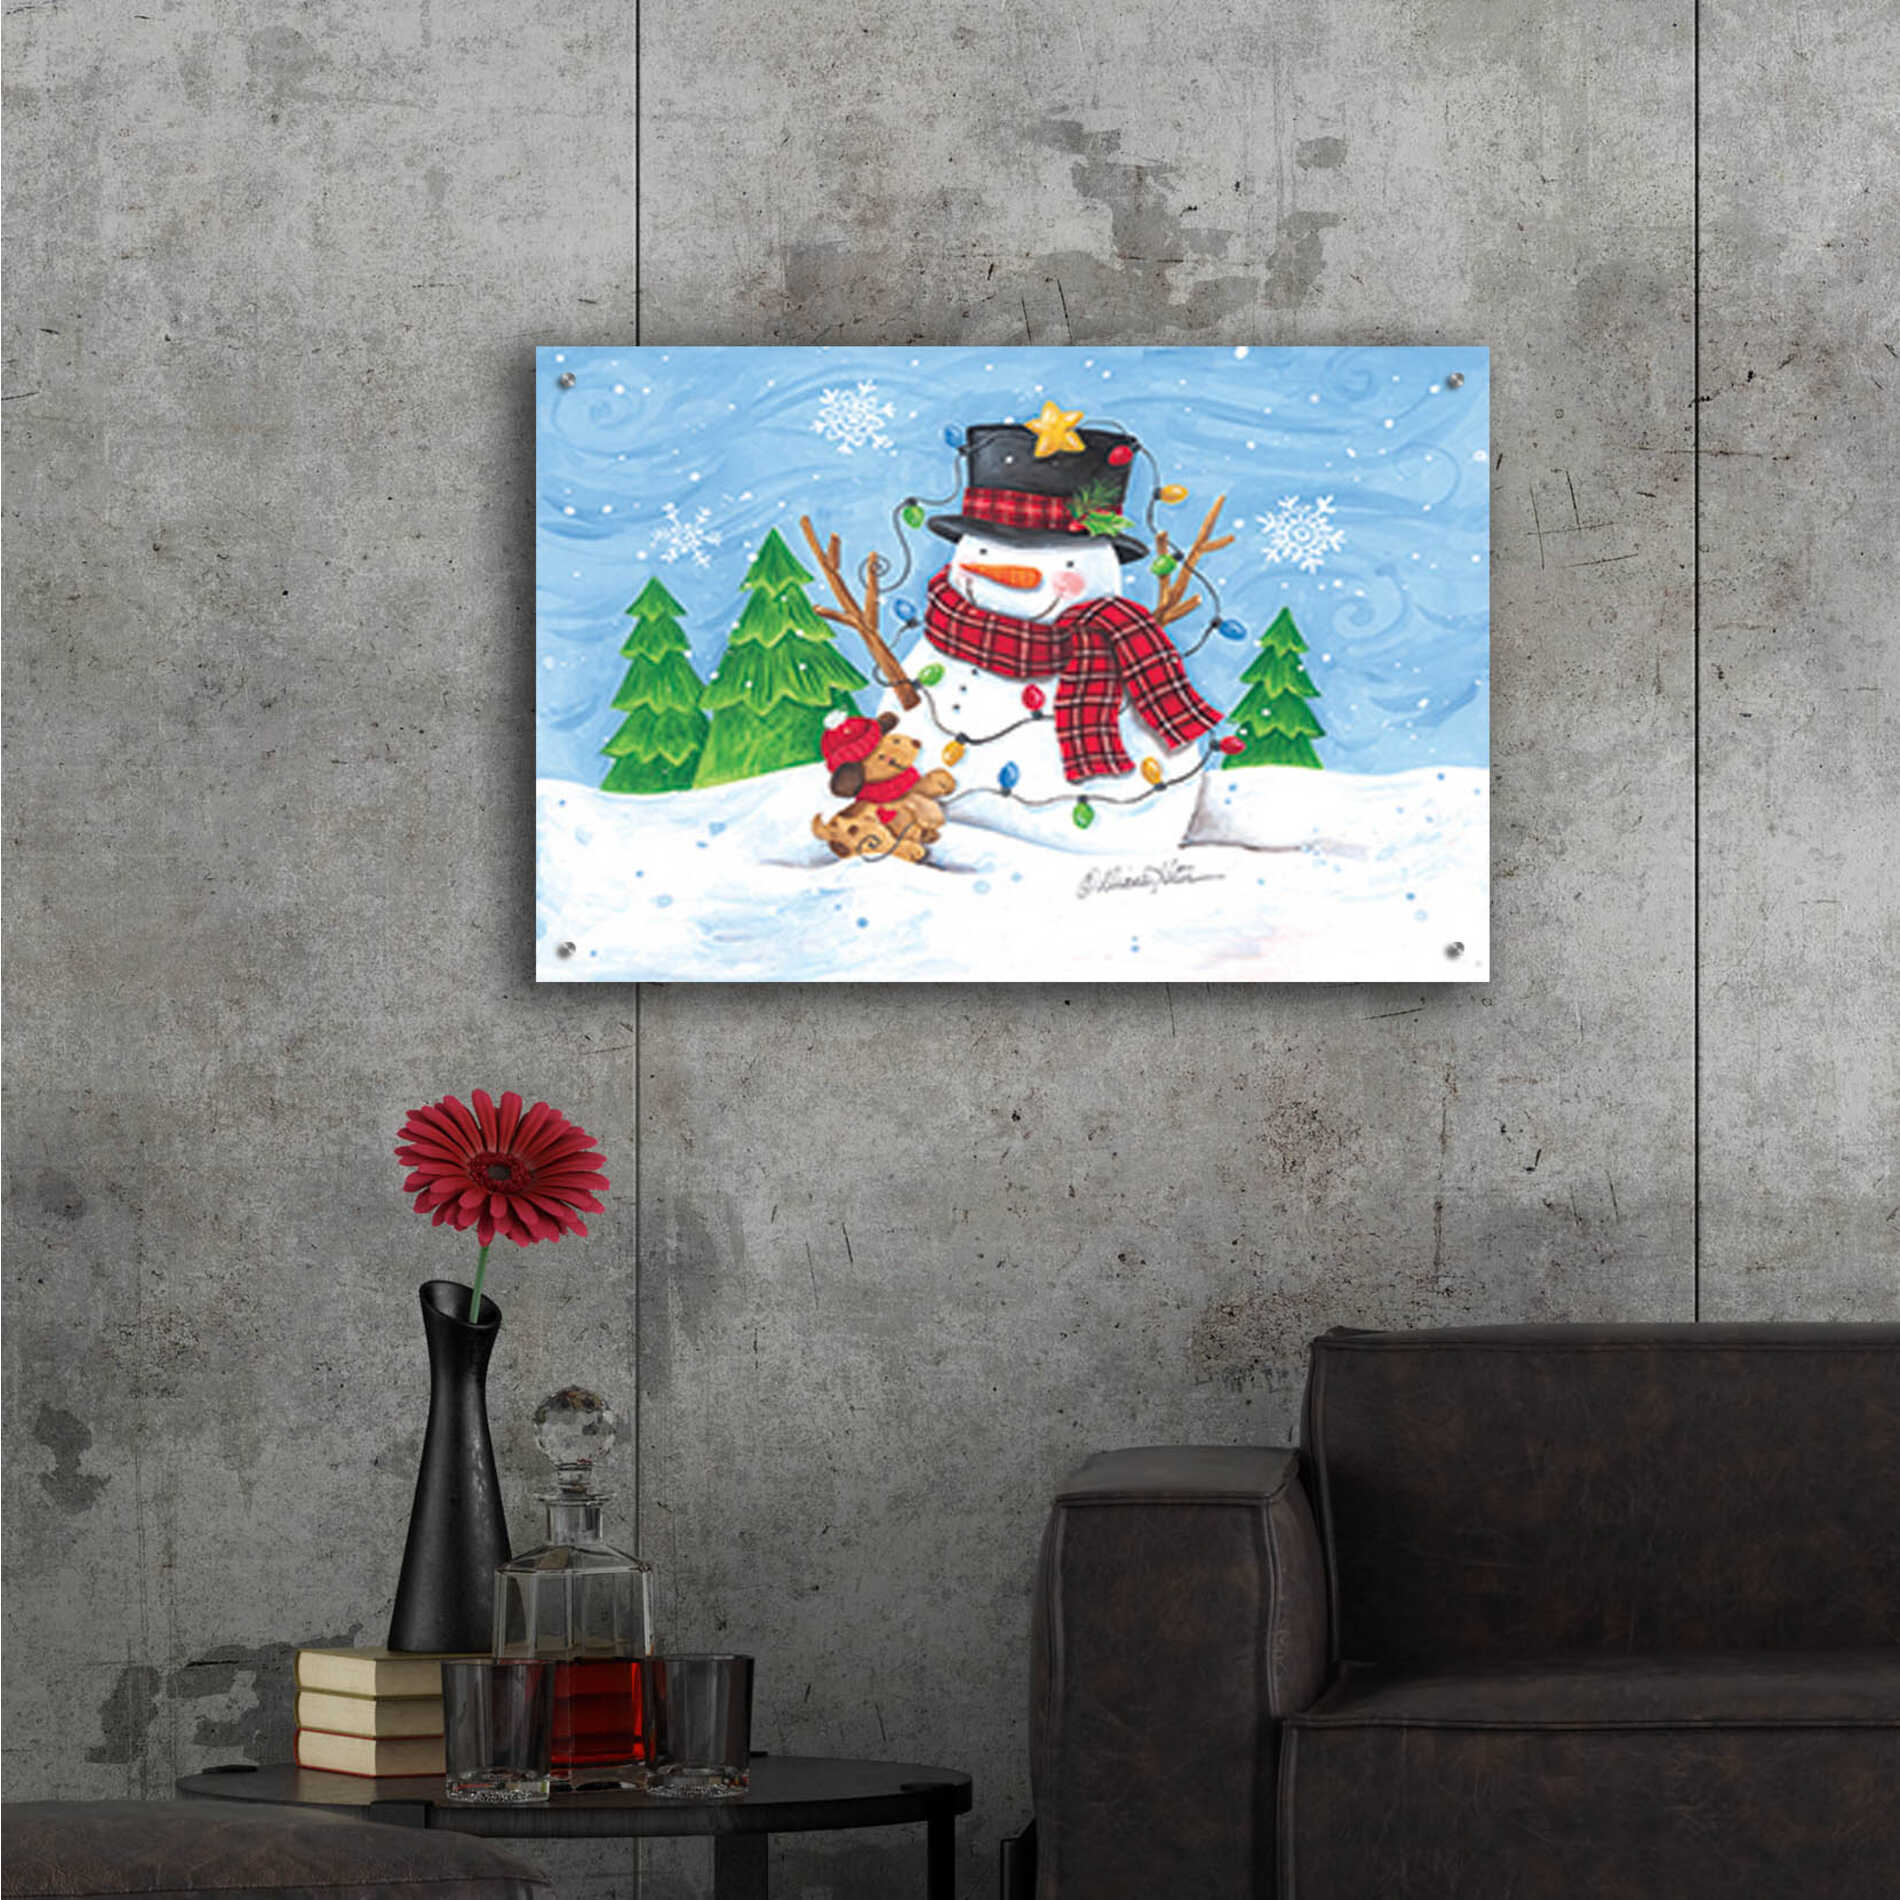 Epic Art 'Snowman and Christmas Lights' by Diane Kater, Acrylic Glass Wall Art,36x24